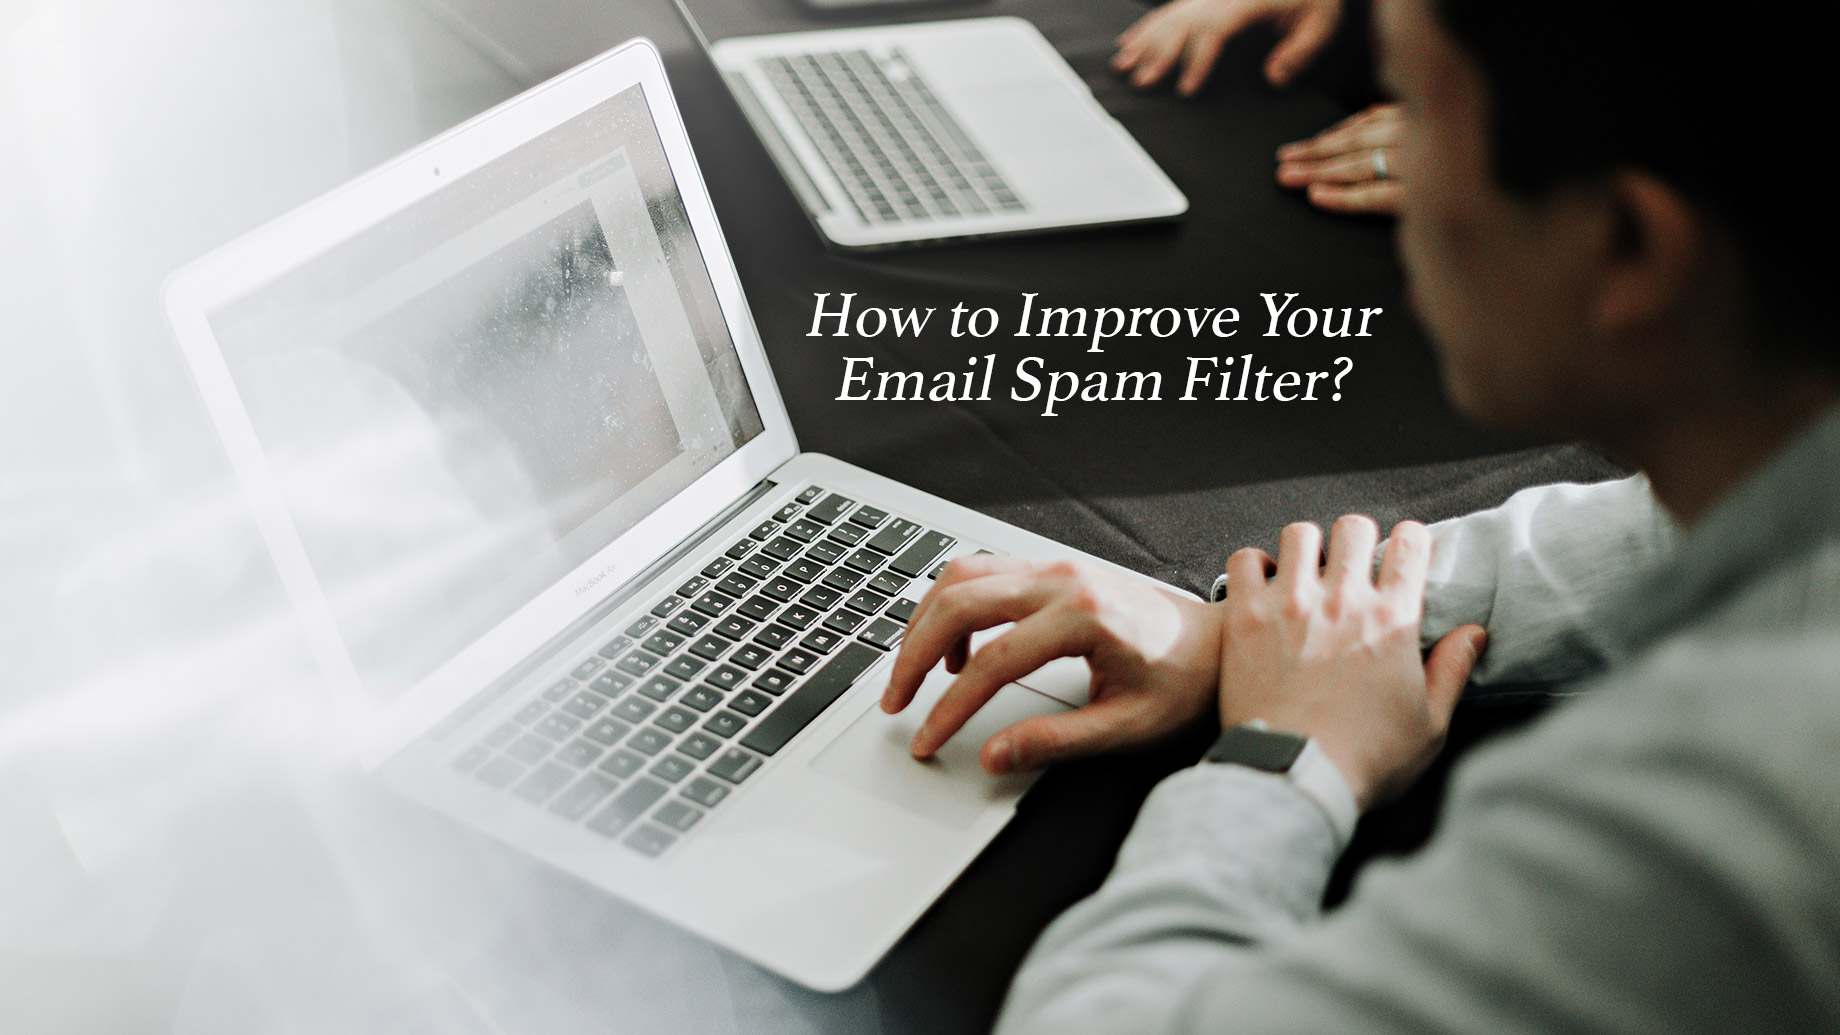 How to Improve Your Email Spam Filter?